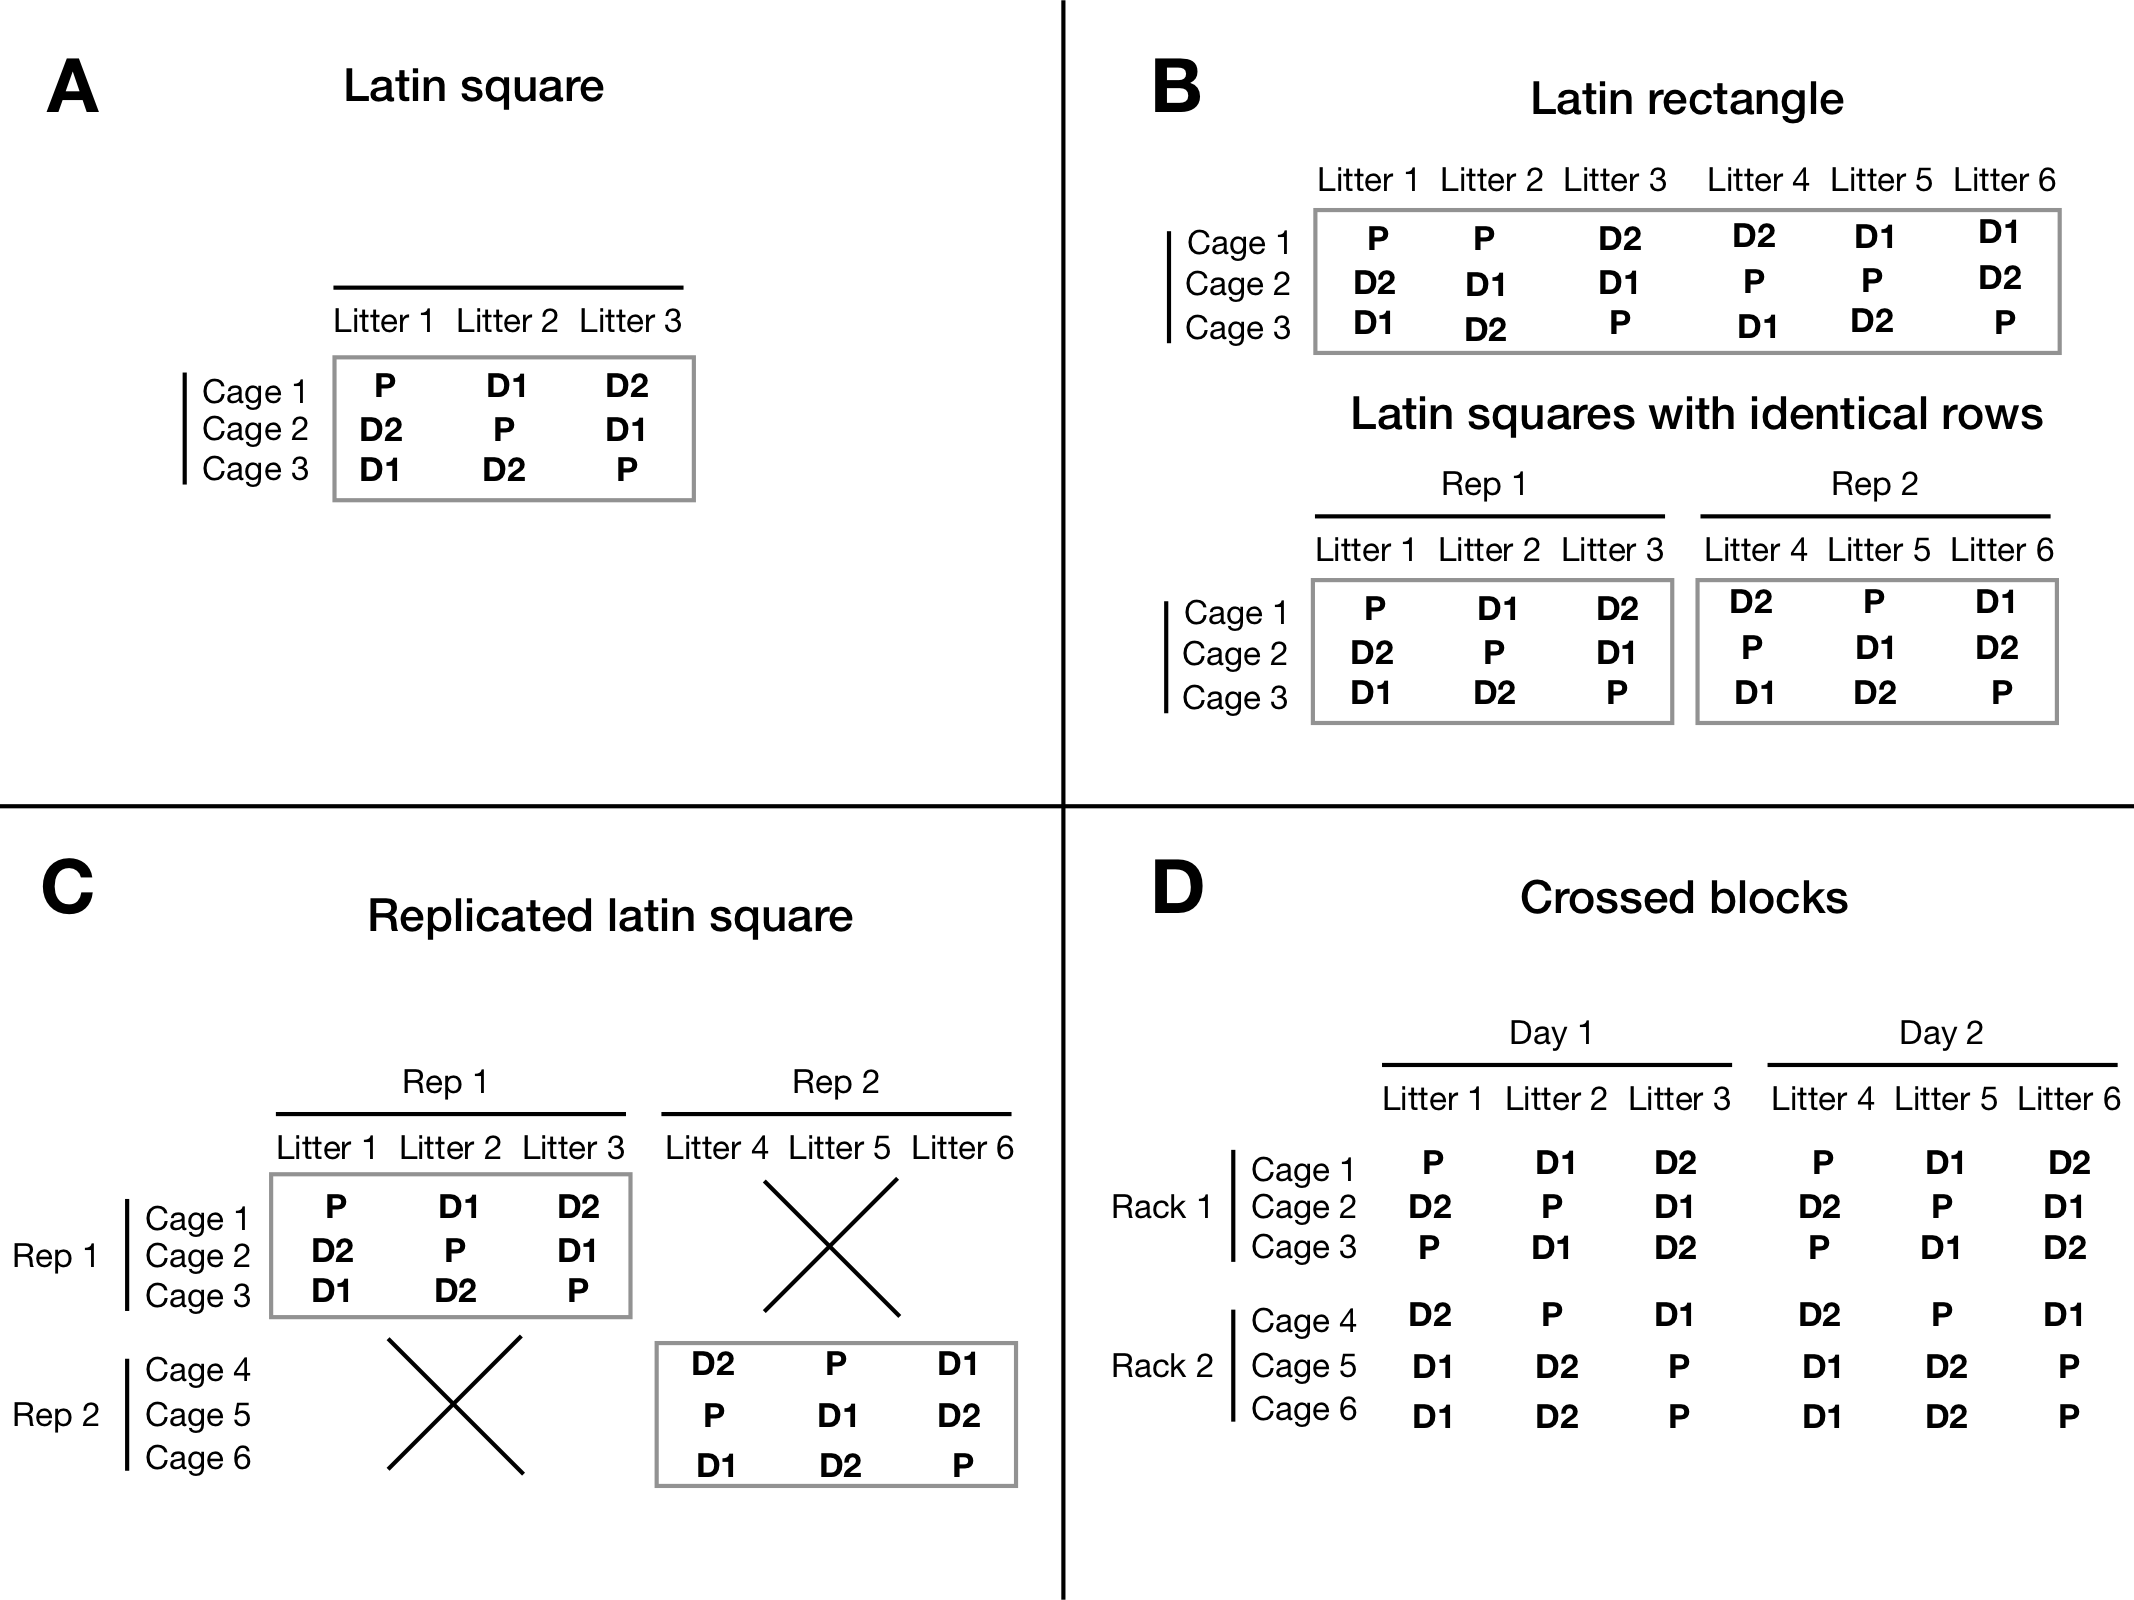 A: Latin square using cage and litter and three drug treatments. B: Replication keeping the same cages, and using more litters without (top) and with (bottom) forming latin squares. C: Full replication with new rows and columns. D: Two fully crossed blocks.